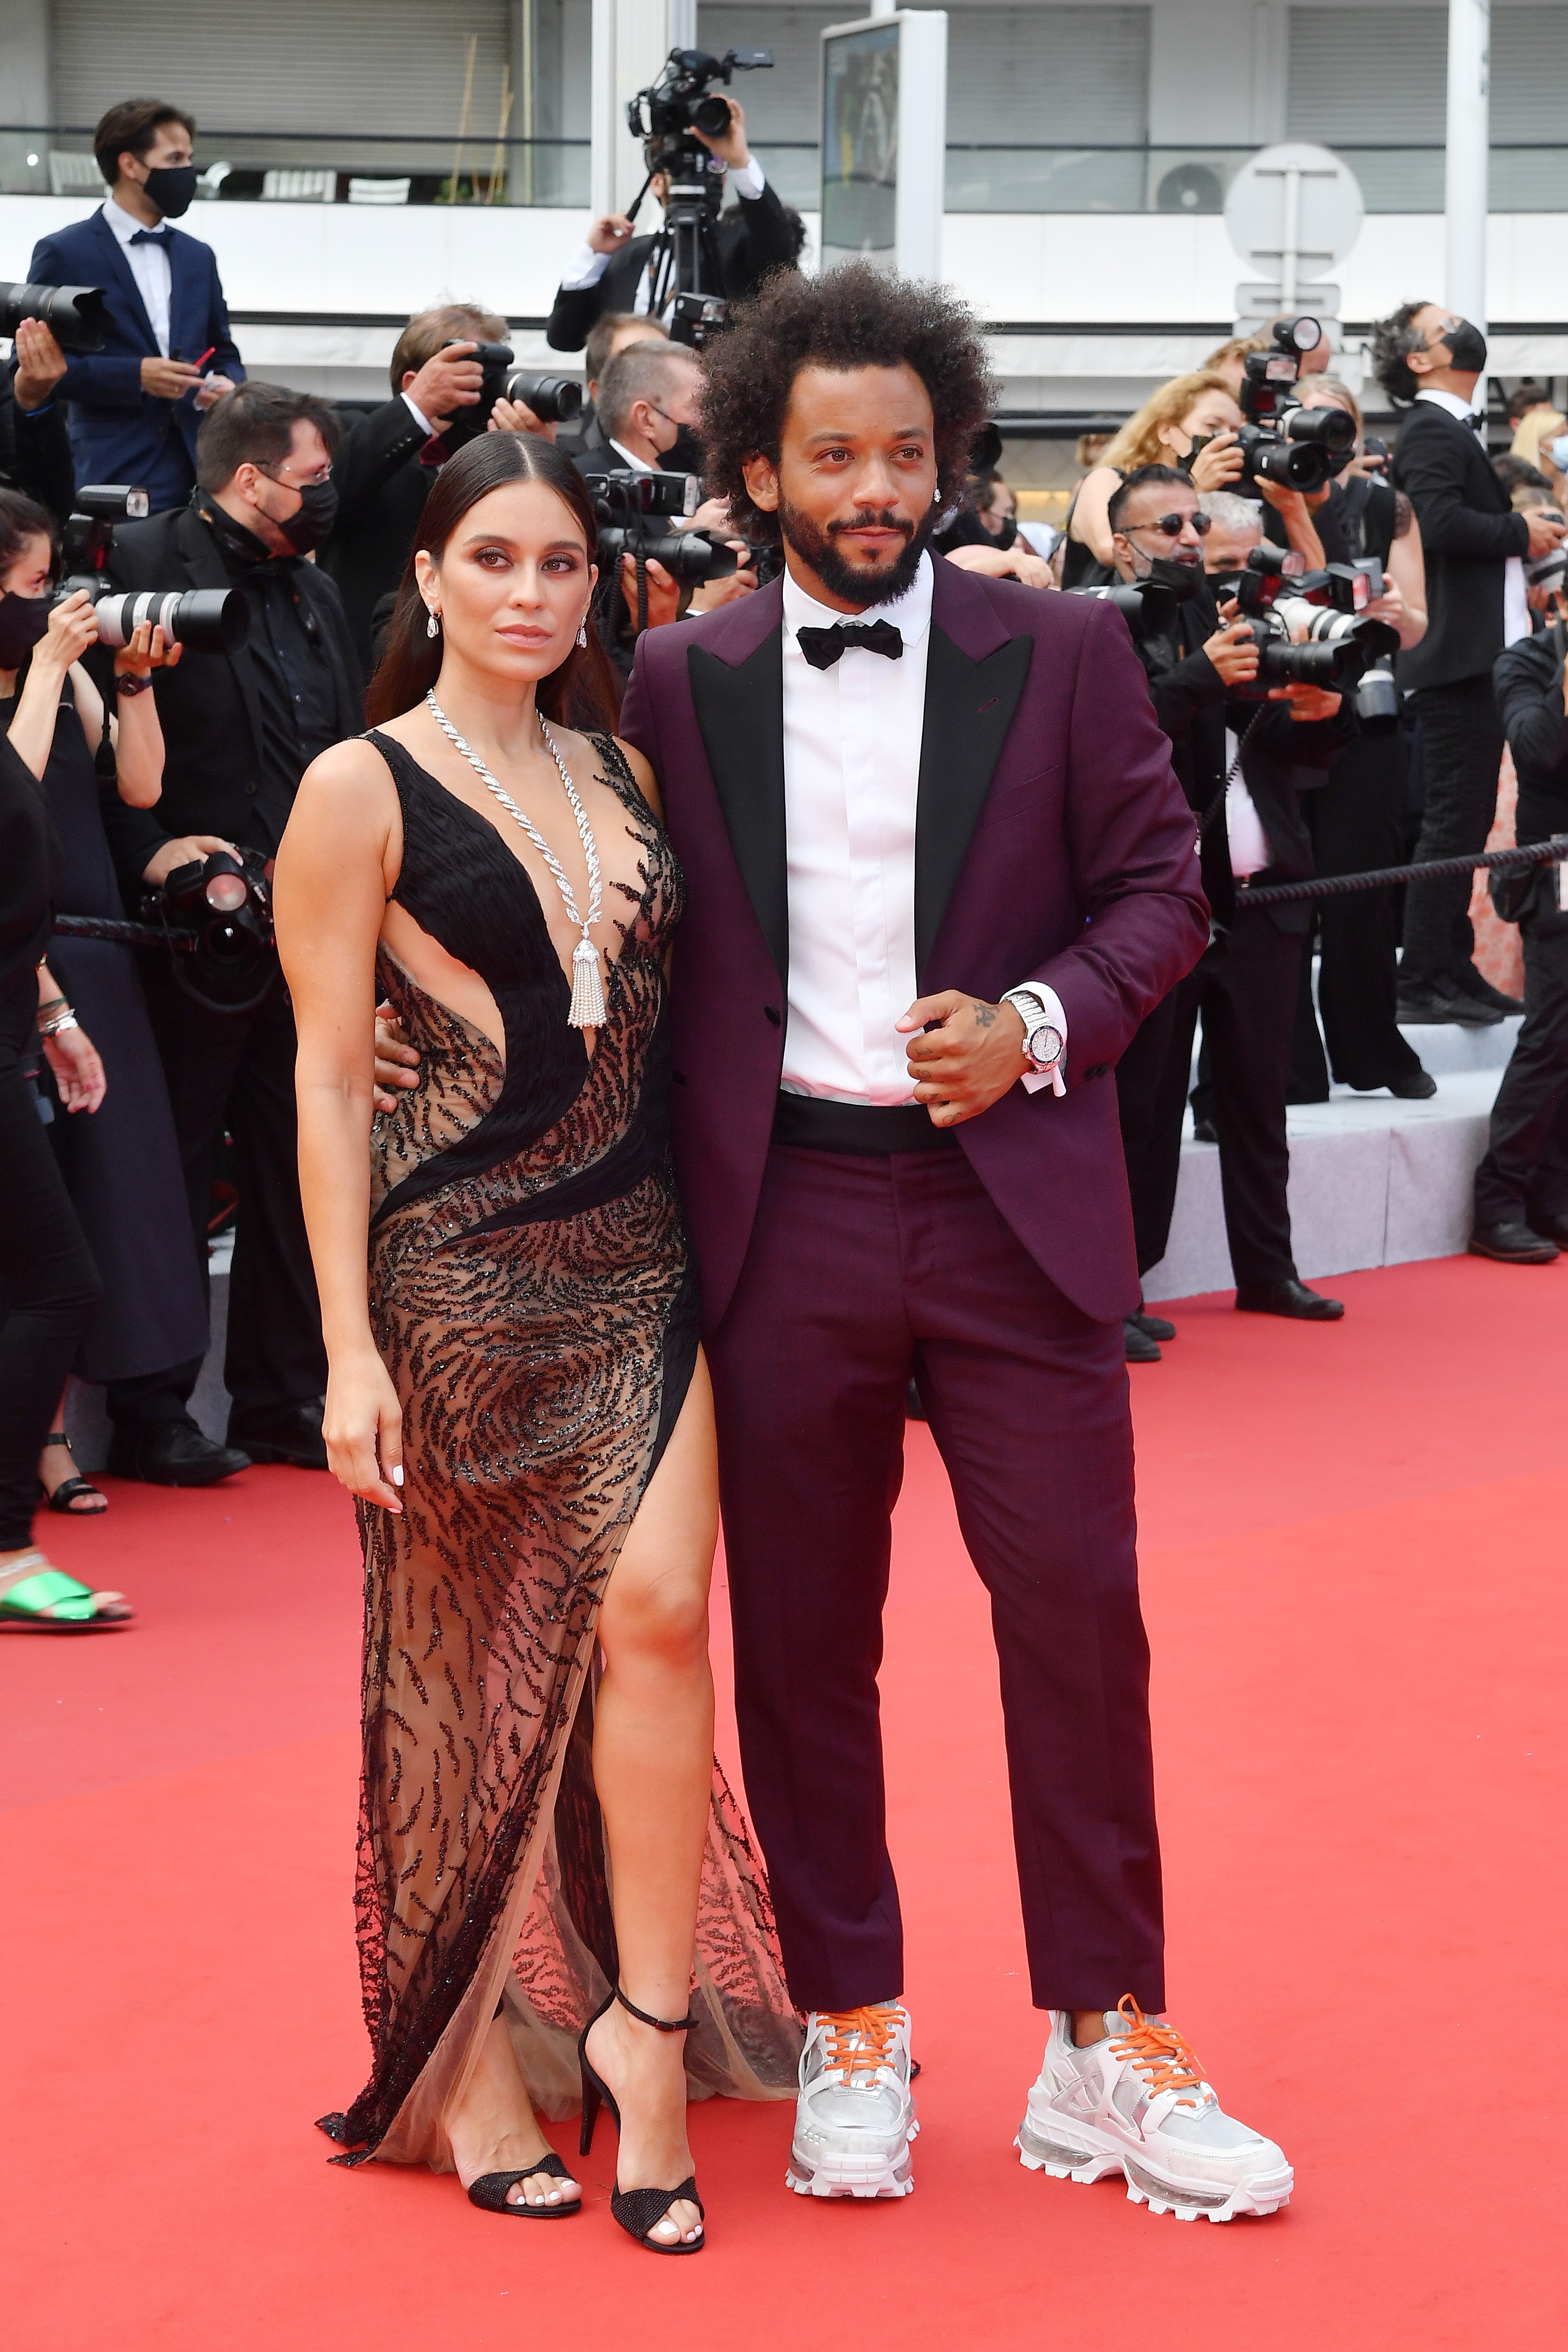 CANNES, FRANCE - JULY 12: Marcelo Vieira and wife Clarisse Alves attend the "The French Dispatch" screening during the 74th annual Cannes Film Festival on July 12, 2021 in Cannes, France. (Photo by Stephane Cardinale - Corbis/Corbis via Getty Images) (Foto: Corbis via Getty Images)